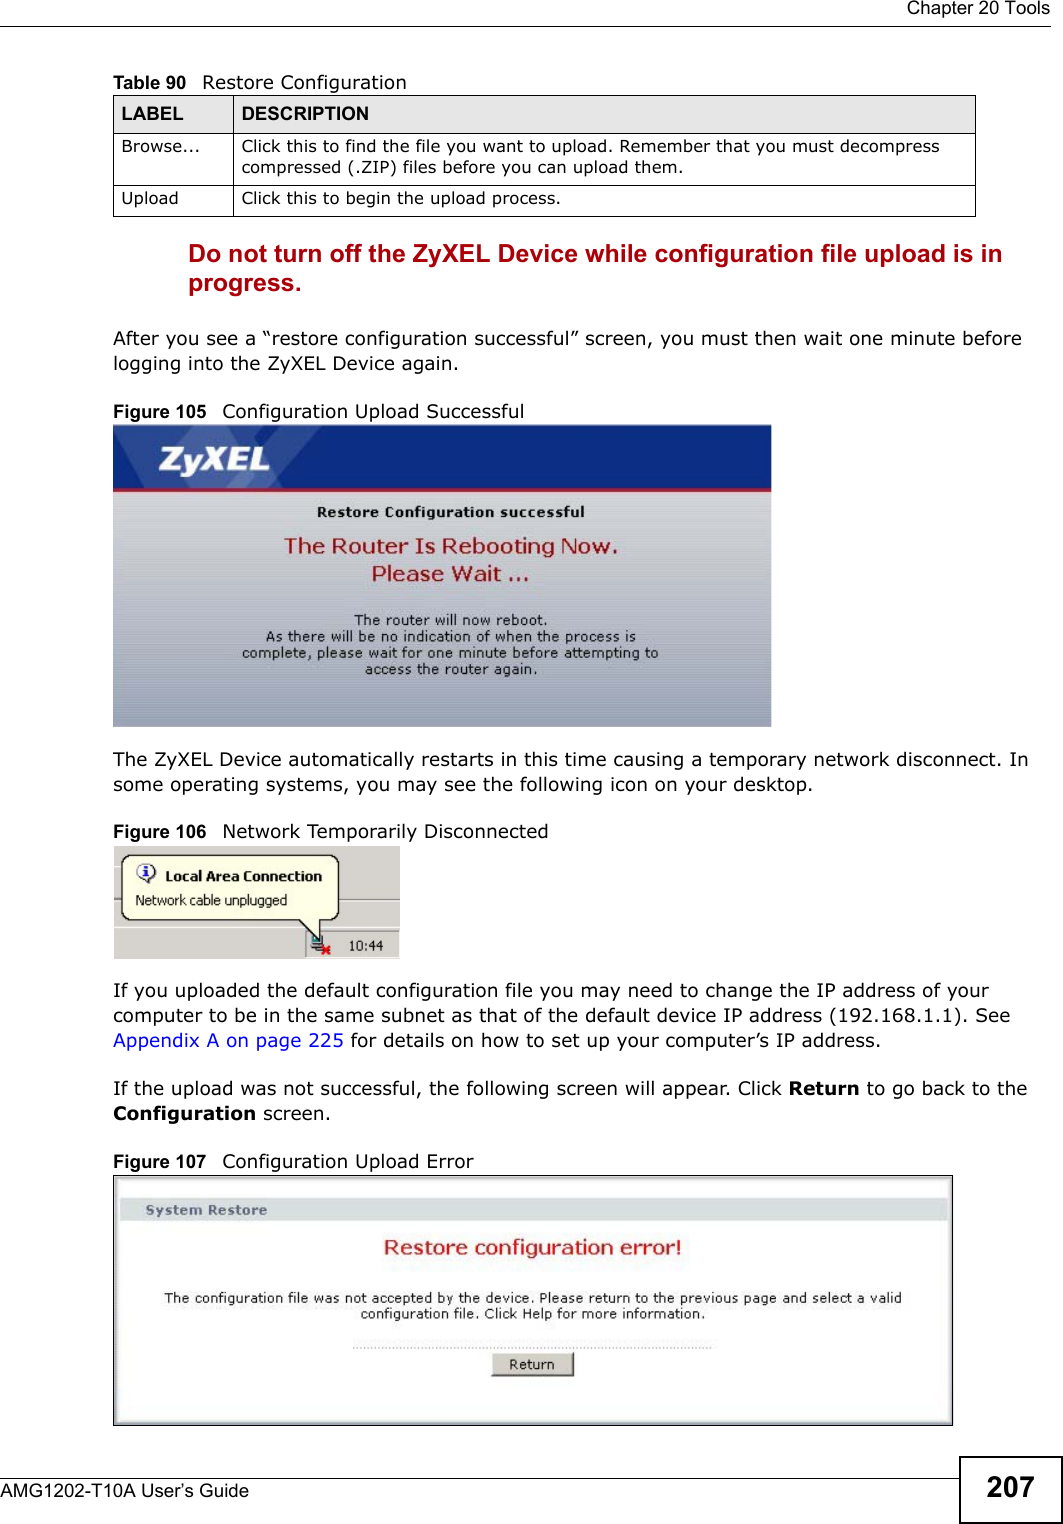  Chapter 20 ToolsAMG1202-T10A User’s Guide 207Do not turn off the ZyXEL Device while configuration file upload is in progress.After you see a “restore configuration successful” screen, you must then wait one minute before logging into the ZyXEL Device again. Figure 105   Configuration Upload SuccessfulThe ZyXEL Device automatically restarts in this time causing a temporary network disconnect. In some operating systems, you may see the following icon on your desktop.Figure 106   Network Temporarily DisconnectedIf you uploaded the default configuration file you may need to change the IP address of your computer to be in the same subnet as that of the default device IP address (192.168.1.1). See Appendix A on page 225 for details on how to set up your computer’s IP address.If the upload was not successful, the following screen will appear. Click Return to go back to the Configuration screen. Figure 107   Configuration Upload ErrorBrowse...  Click this to find the file you want to upload. Remember that you must decompress compressed (.ZIP) files before you can upload them. Upload  Click this to begin the upload process.Table 90   Restore ConfigurationLABEL DESCRIPTION